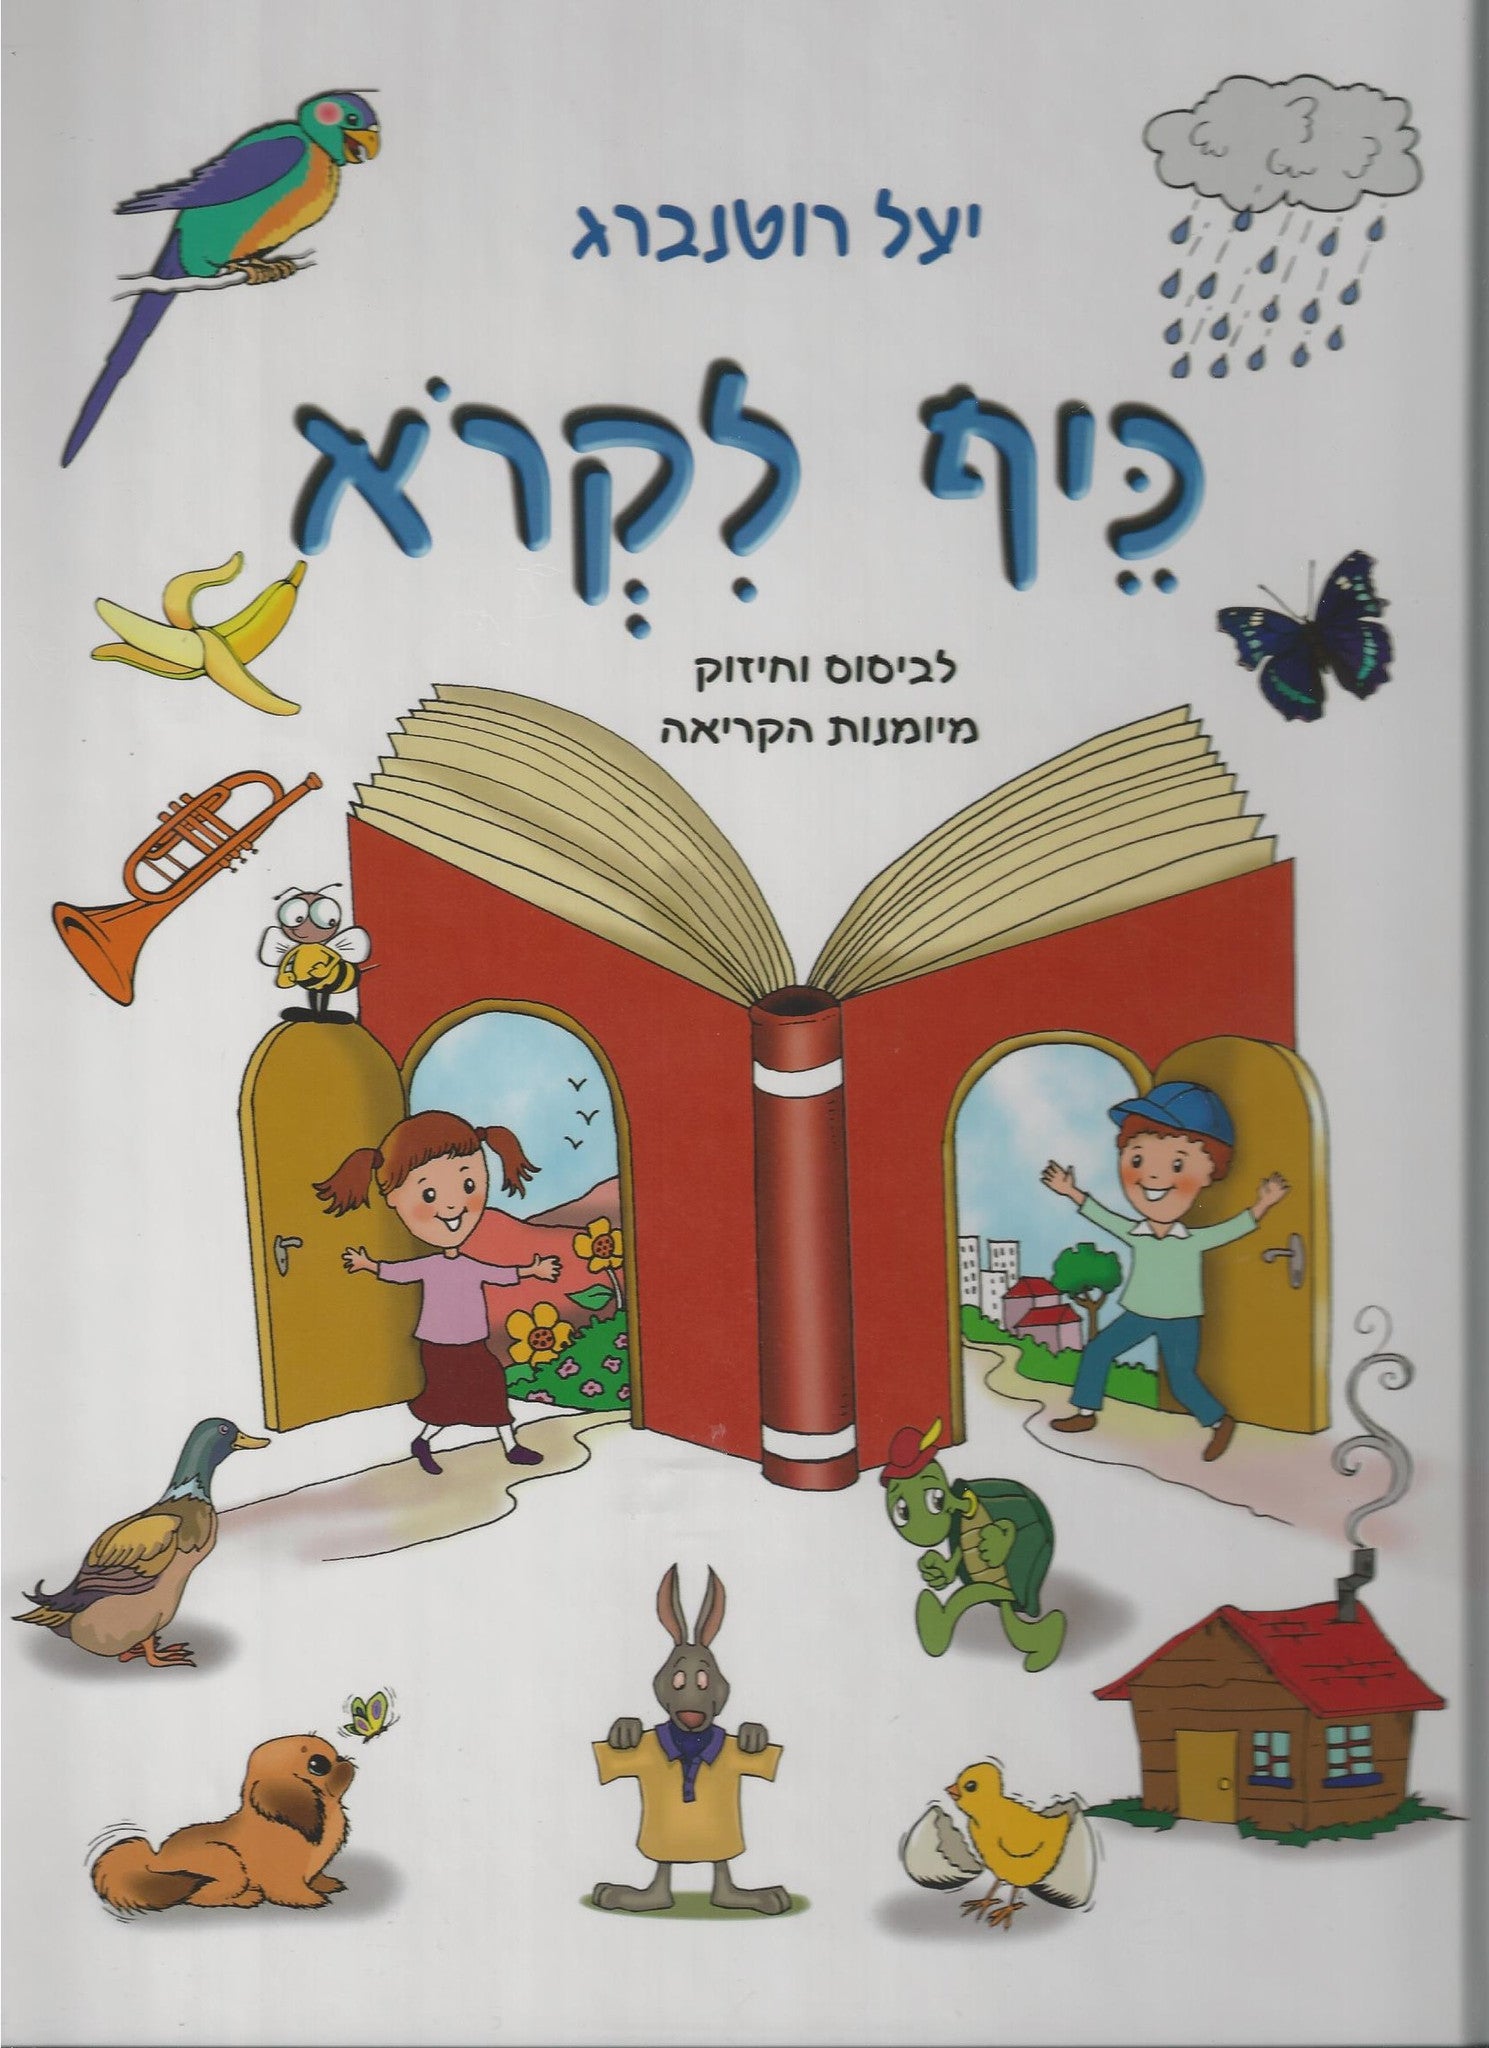 It's Fun to Read in Hebrew